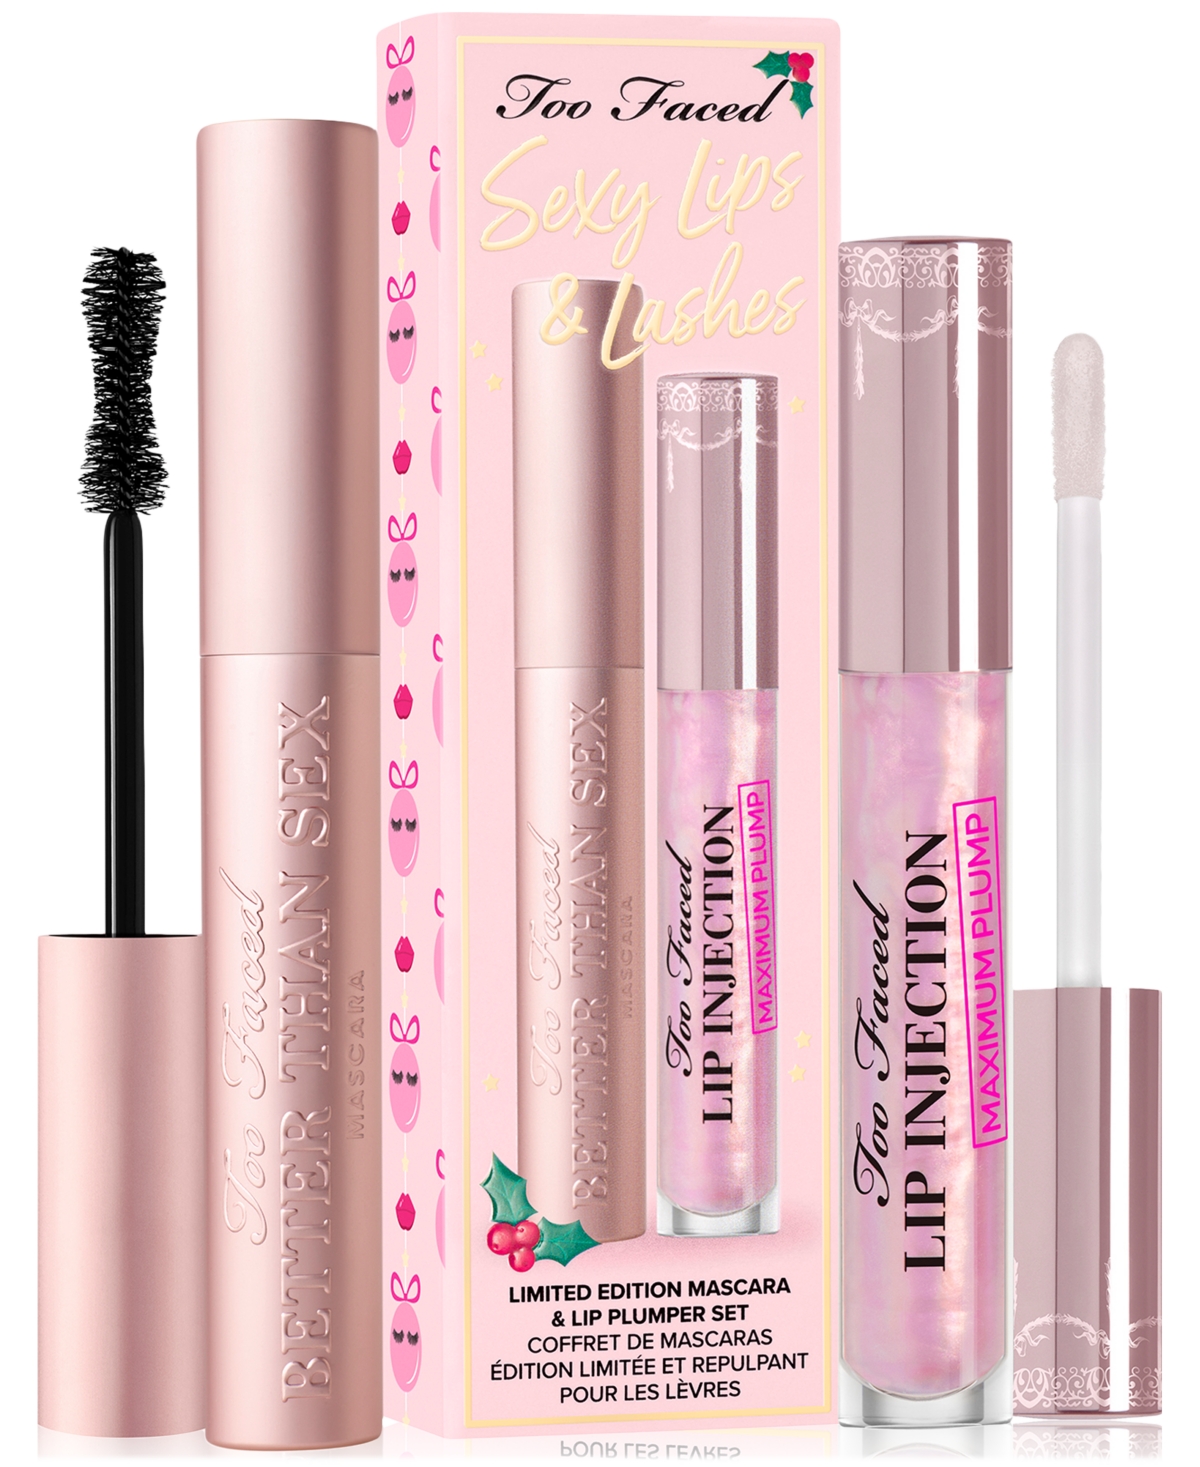 Too Faced Sexy Lips & Lashes Limited-edition Mascara & Lip Plumper Set In Multi